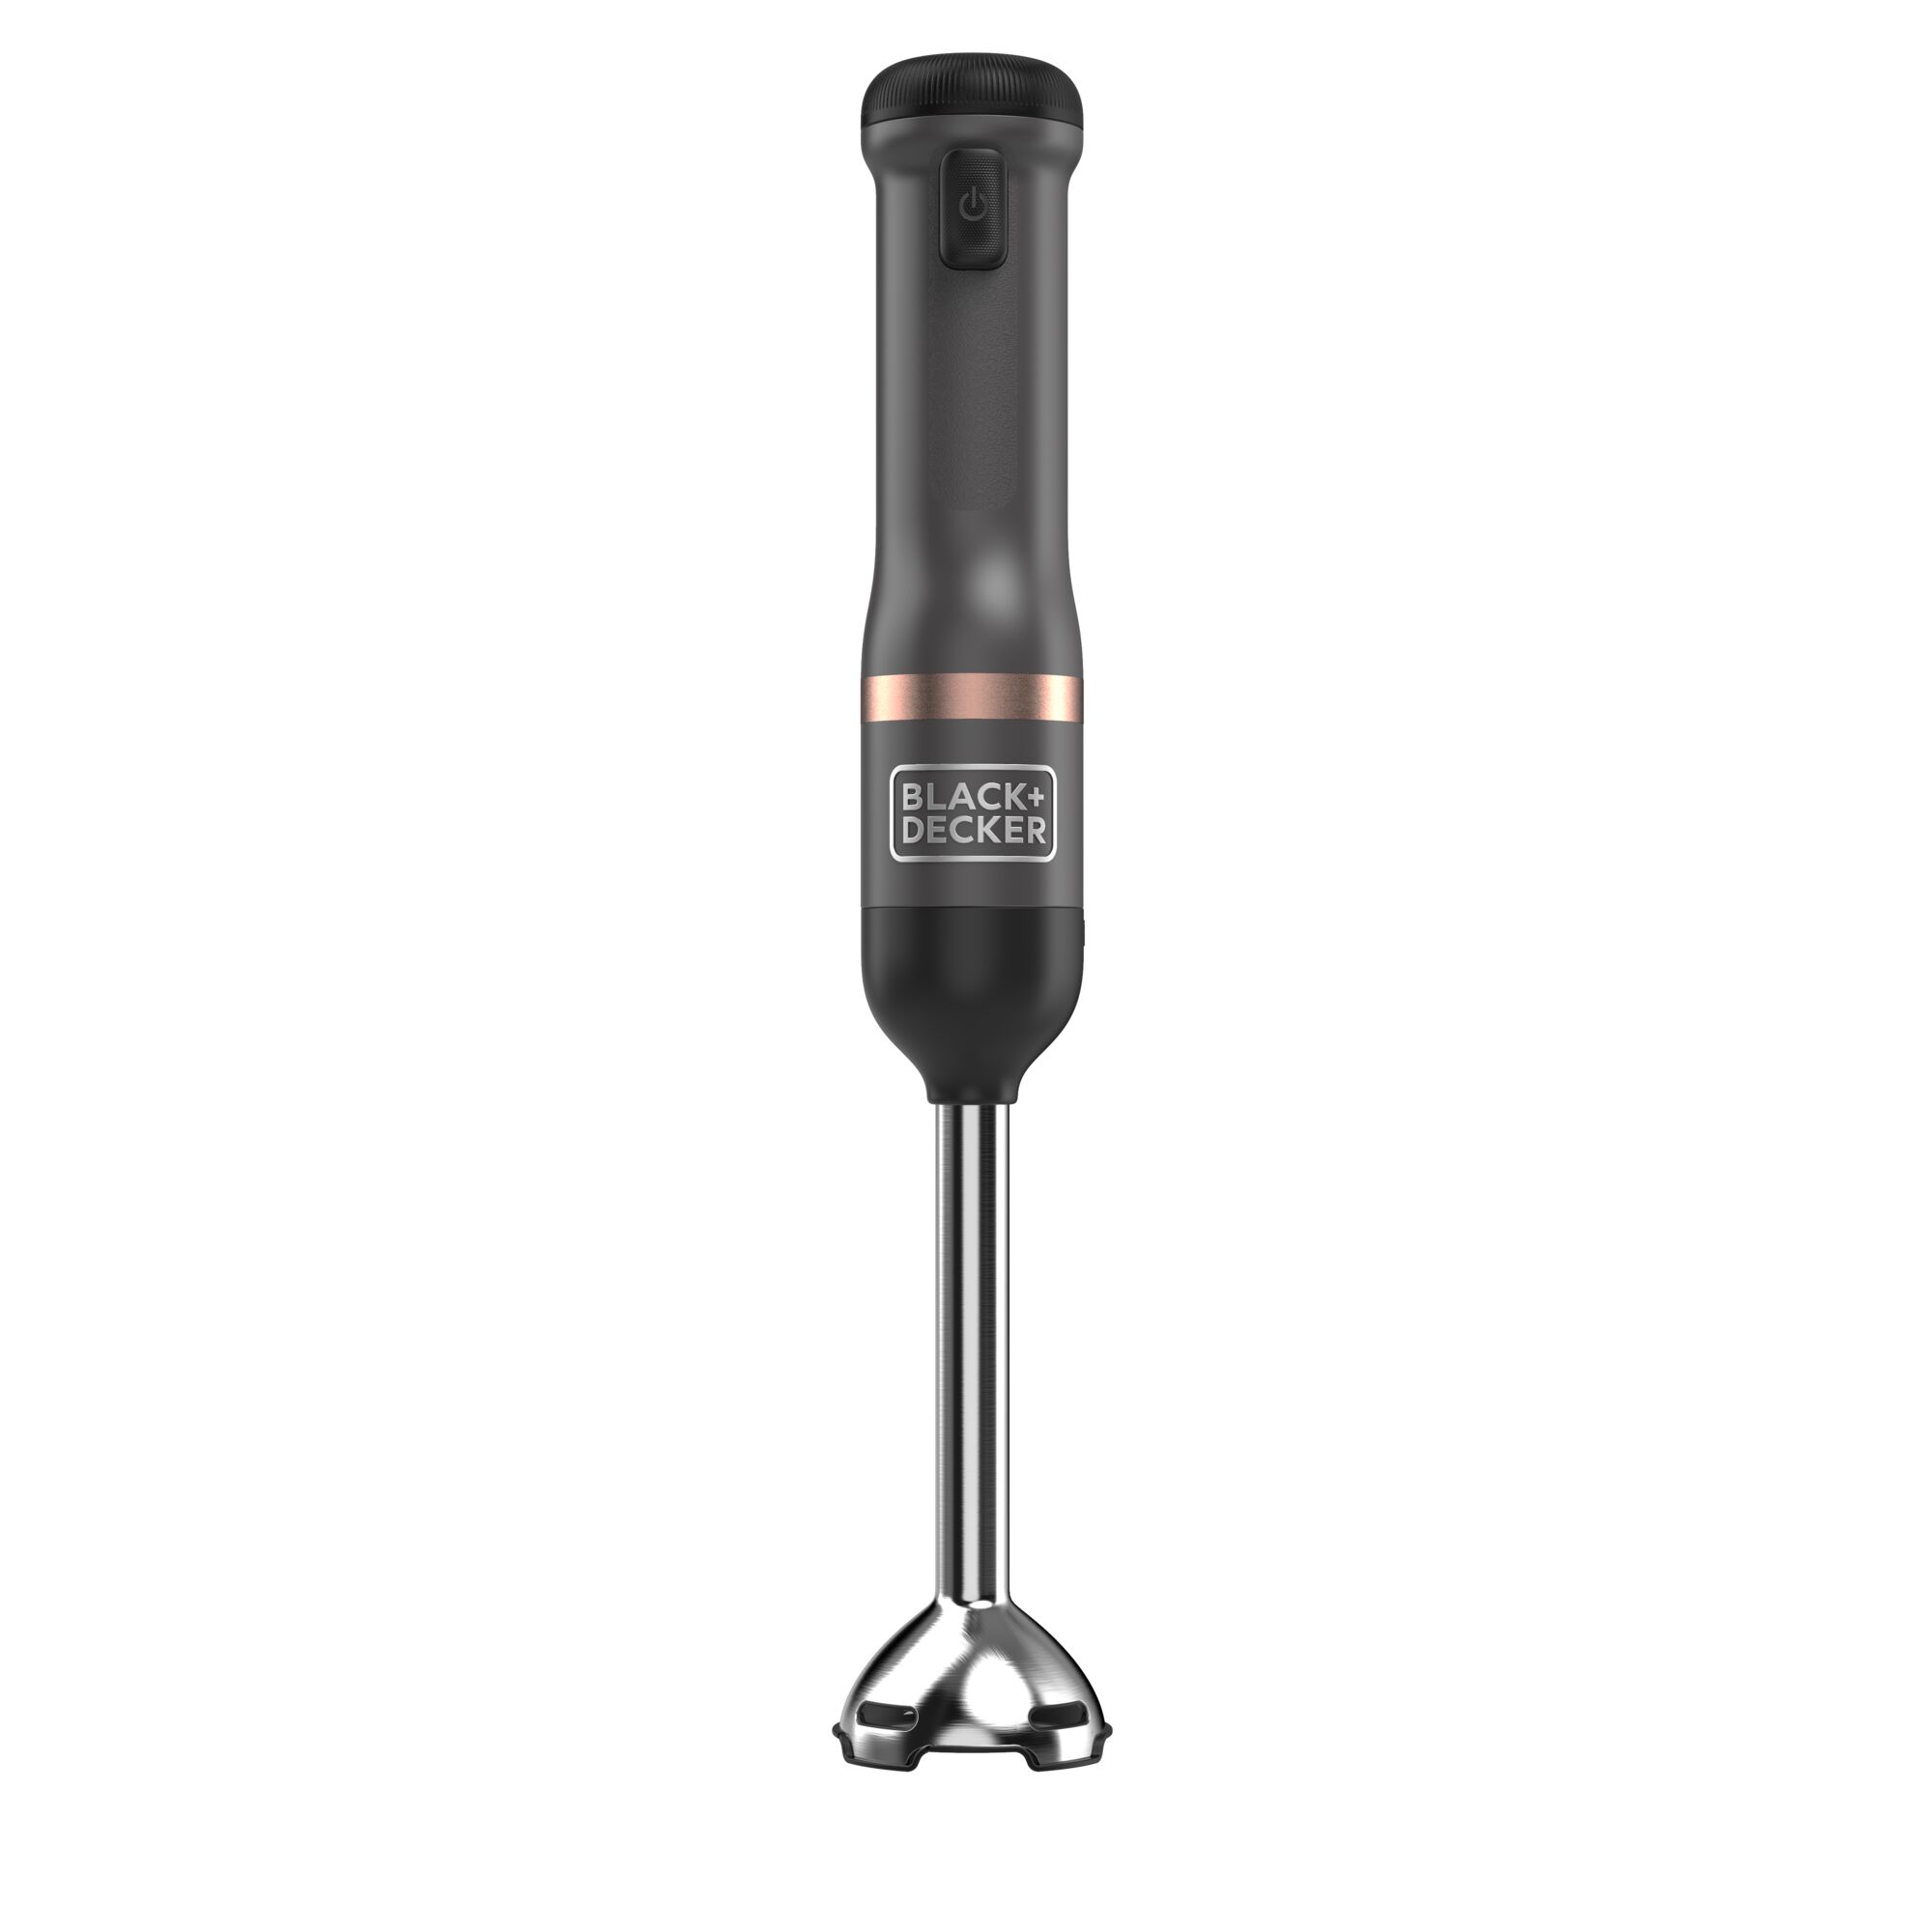 Profile front view of the BLACK+DECKER kitchen wand immersion blender attachment attached to the grey wand base